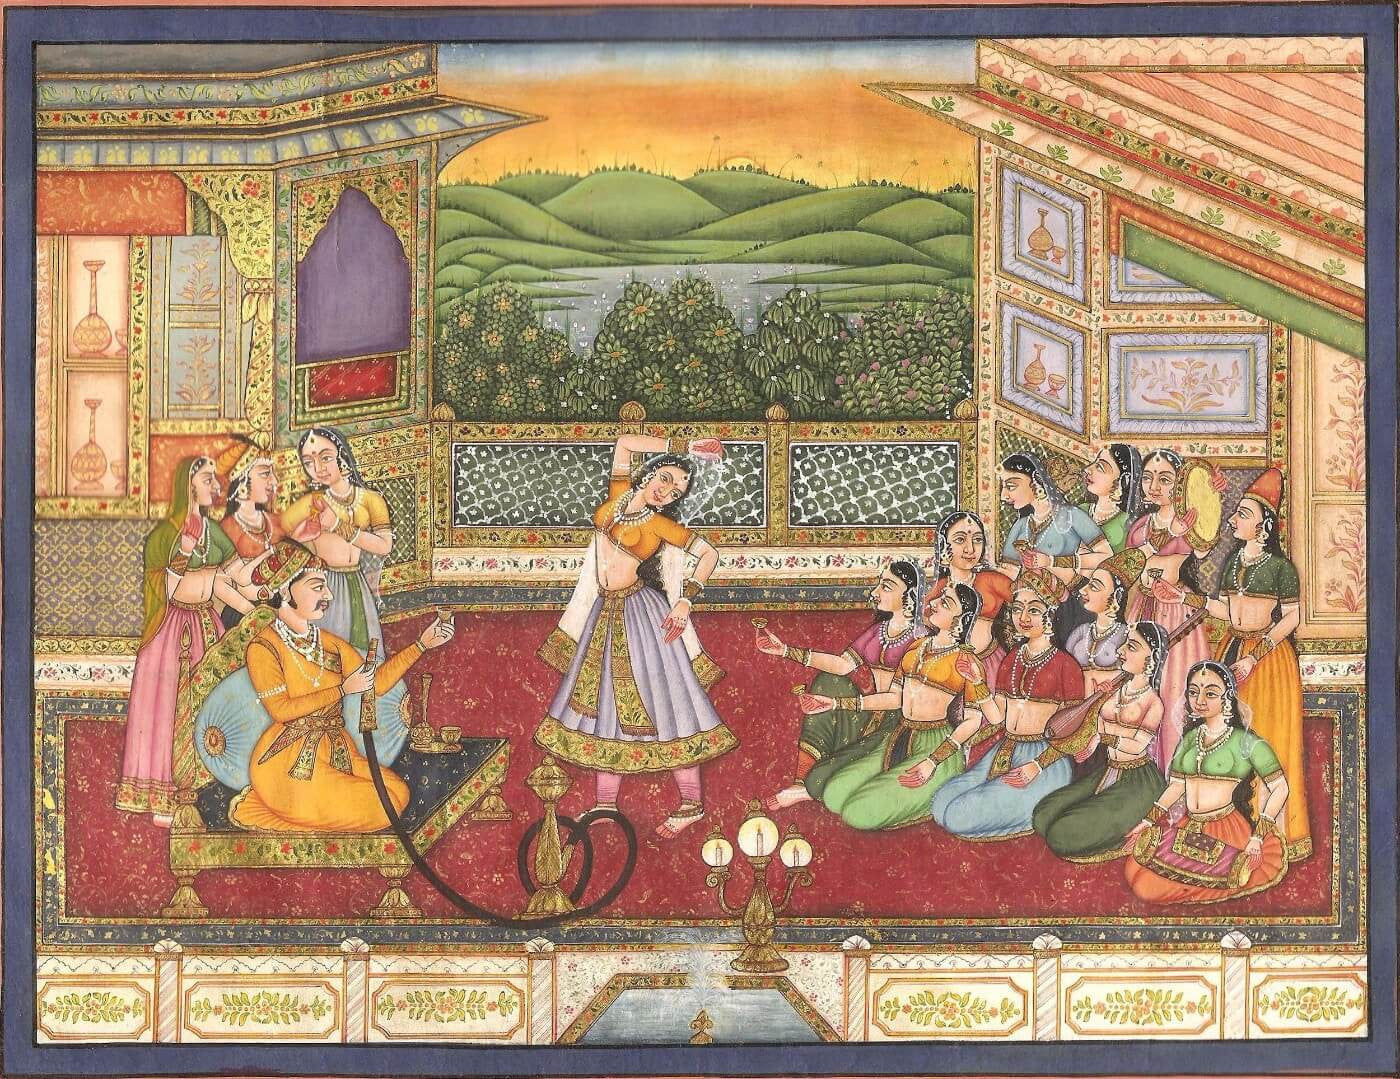 Indian Miniature Art - Mughal Painting - Evening - Art Prints by ...